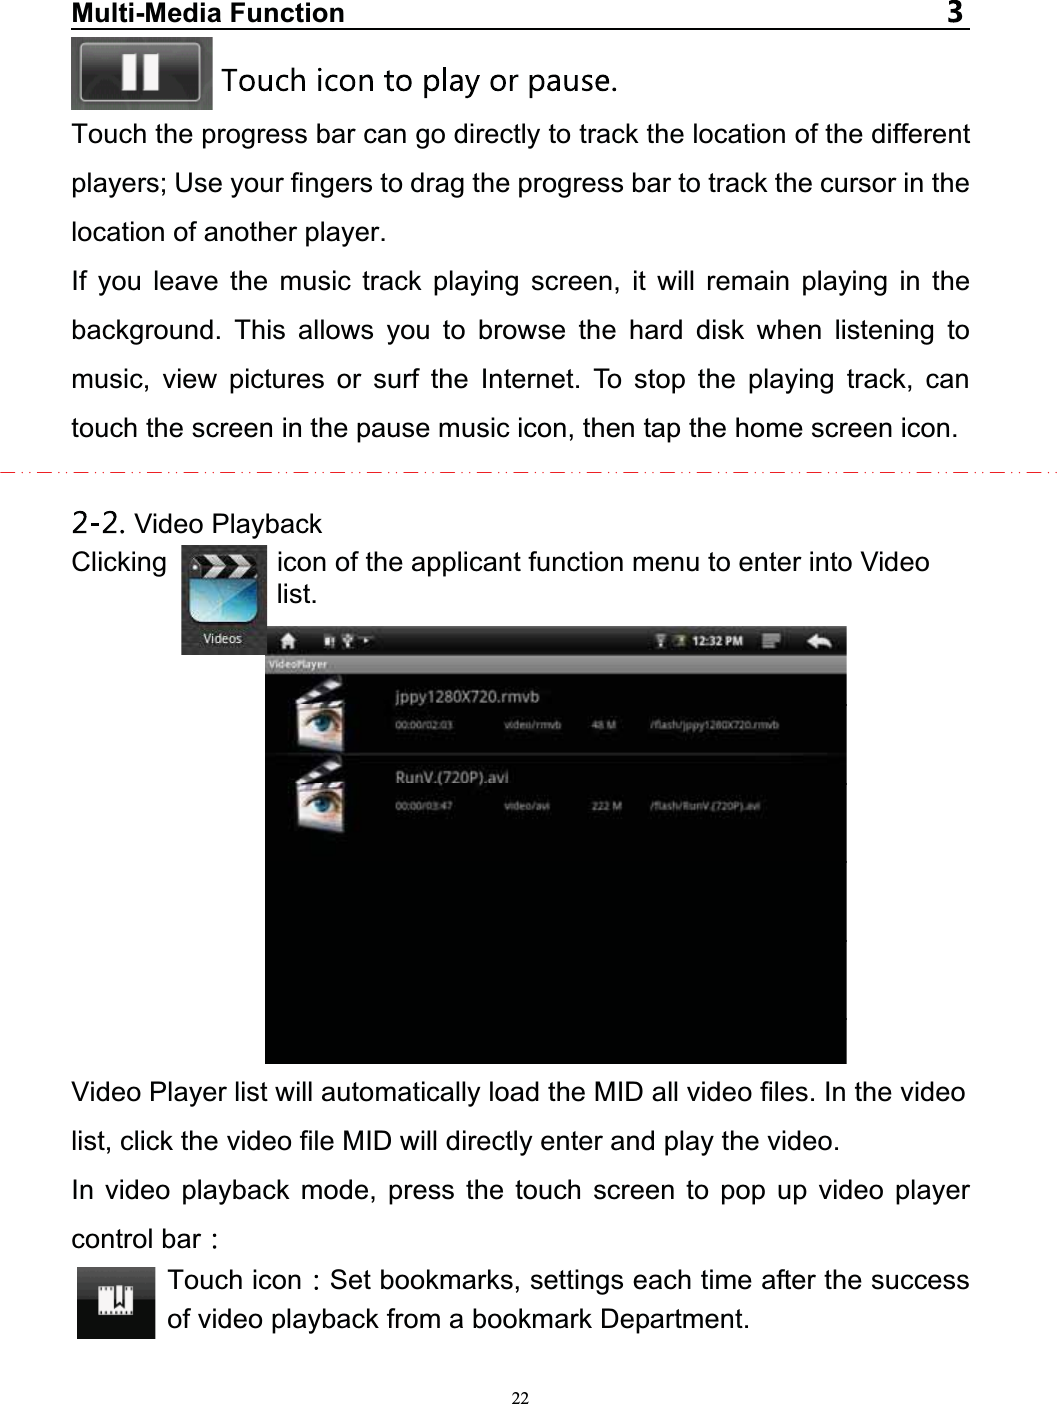   22Multi-Media FunctionTouch the progress bar can go directly to track the location of the different players; Use your fingers to drag the progress bar to track the cursor in the location of another player. If you leave the music track playing screen, it will remain playing in the background. This allows you to browse the hard disk when listening to music, view pictures or surf the Internet. To stop the playing track, can touch the screen in the pause music icon, then tap the home screen icon. Video PlaybackClicking        icon of the applicant function menu to enter into Video list. Video Player list will automatically load the MID all video files. In the video list, click the video file MID will directly enter and play the video. In video playback mode, press the touch screen to pop up video player control bar  Touch icon Set bookmarks, settings each time after the success of video playback from a bookmark Department.  